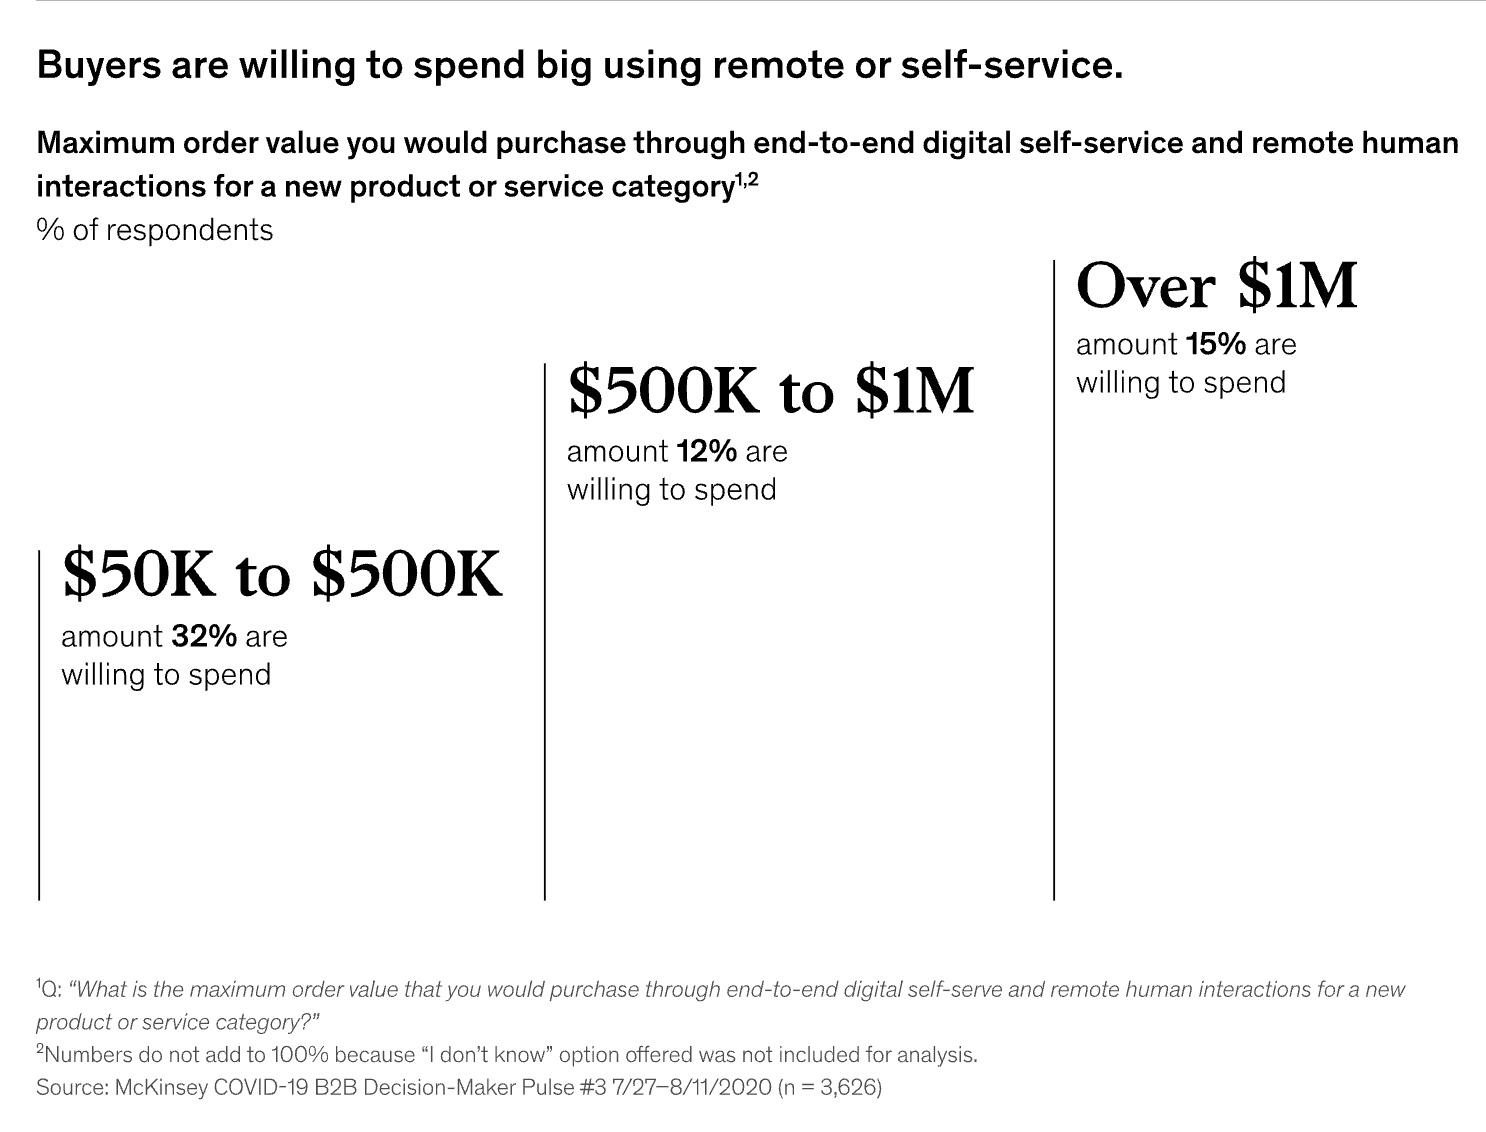 Infographic from McKinsey that explains buyers are willing to spend significantly using remote or self-service.